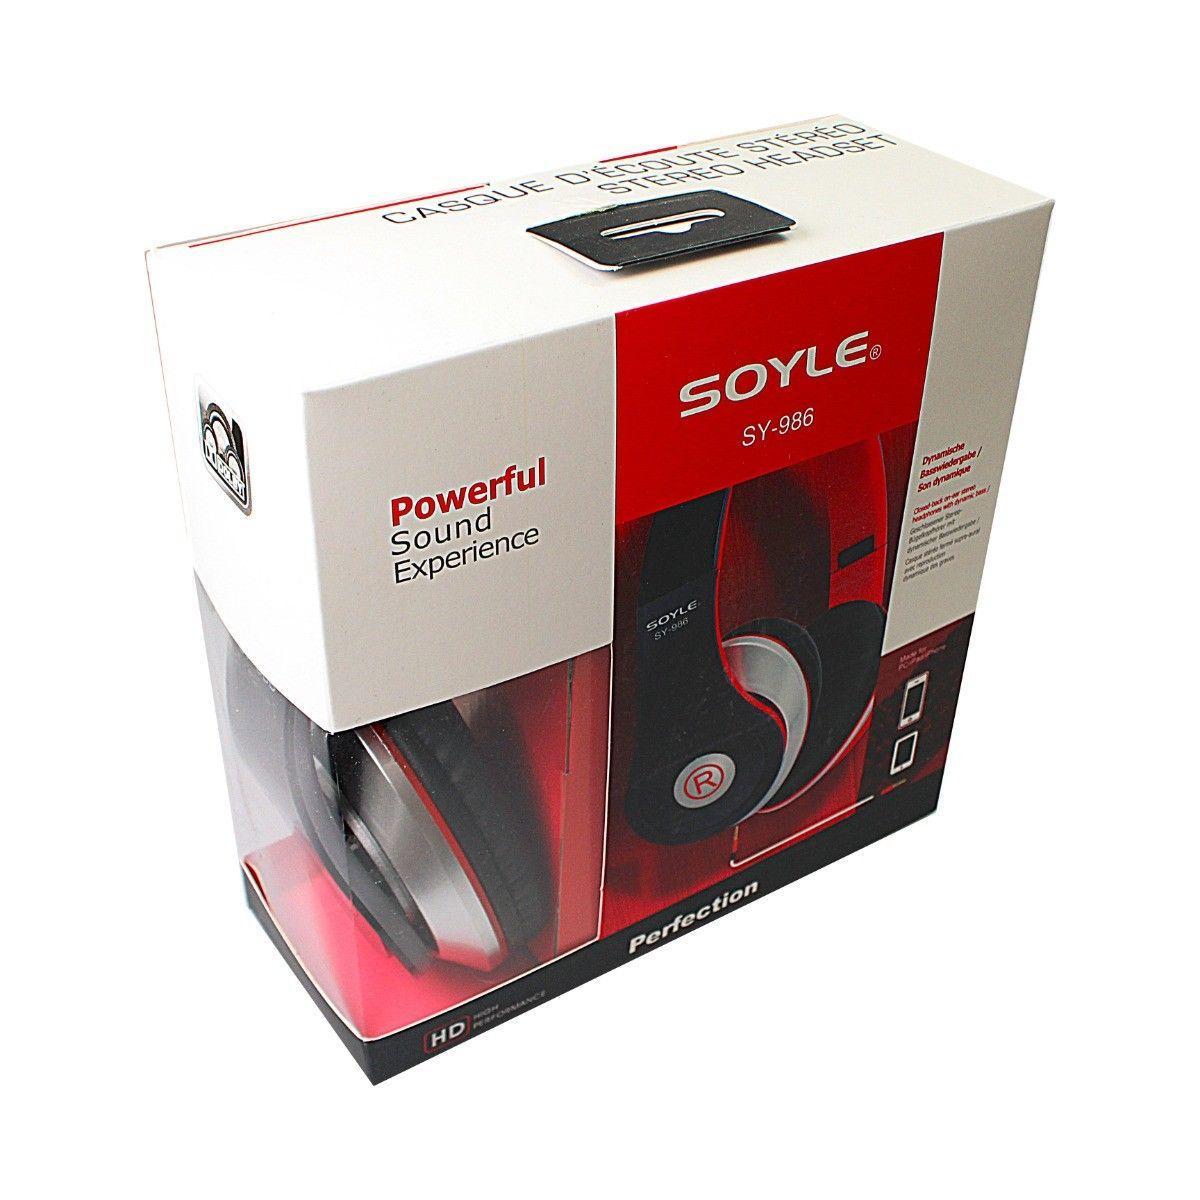 SOYLE 986 Powerful Sound Experience Headphones 0668 (Parcel Rate)